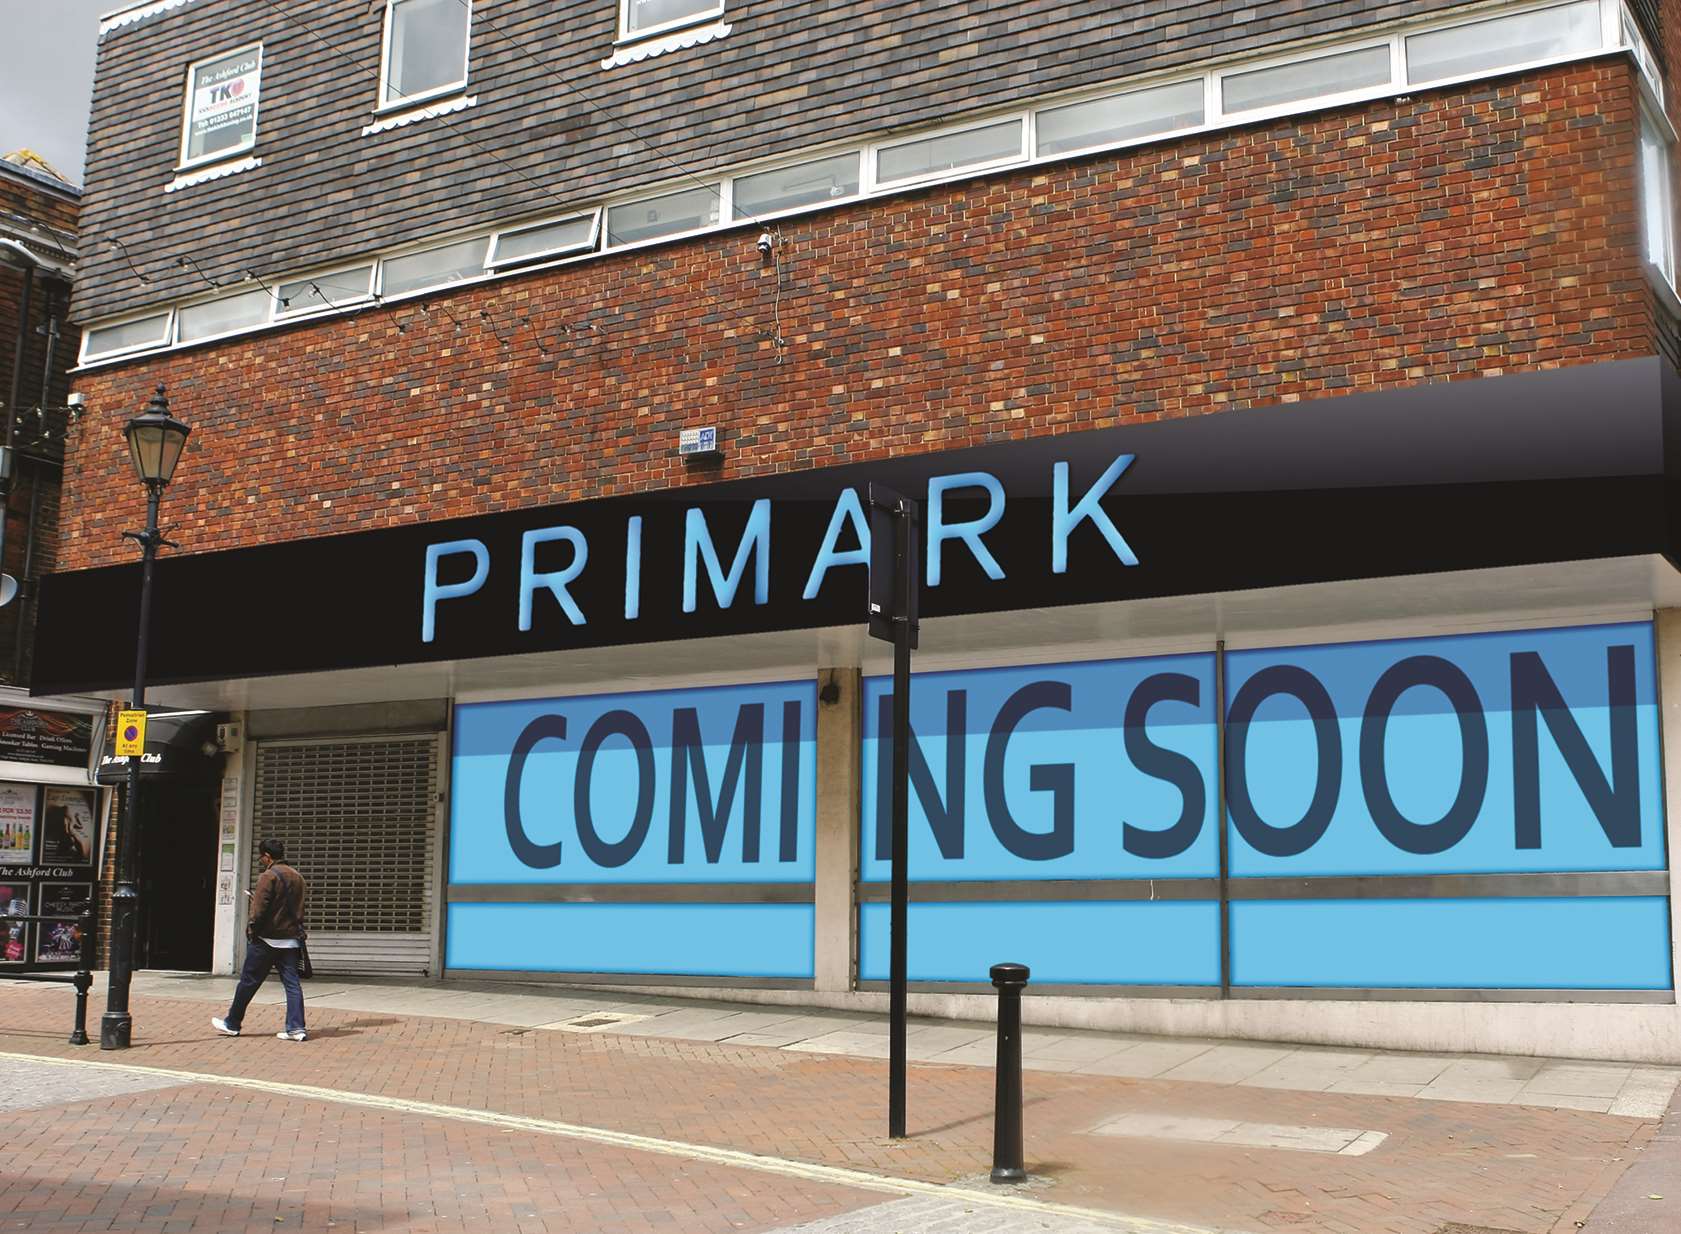 Coming soon - a long-awaited Primark store for Ashford town centre